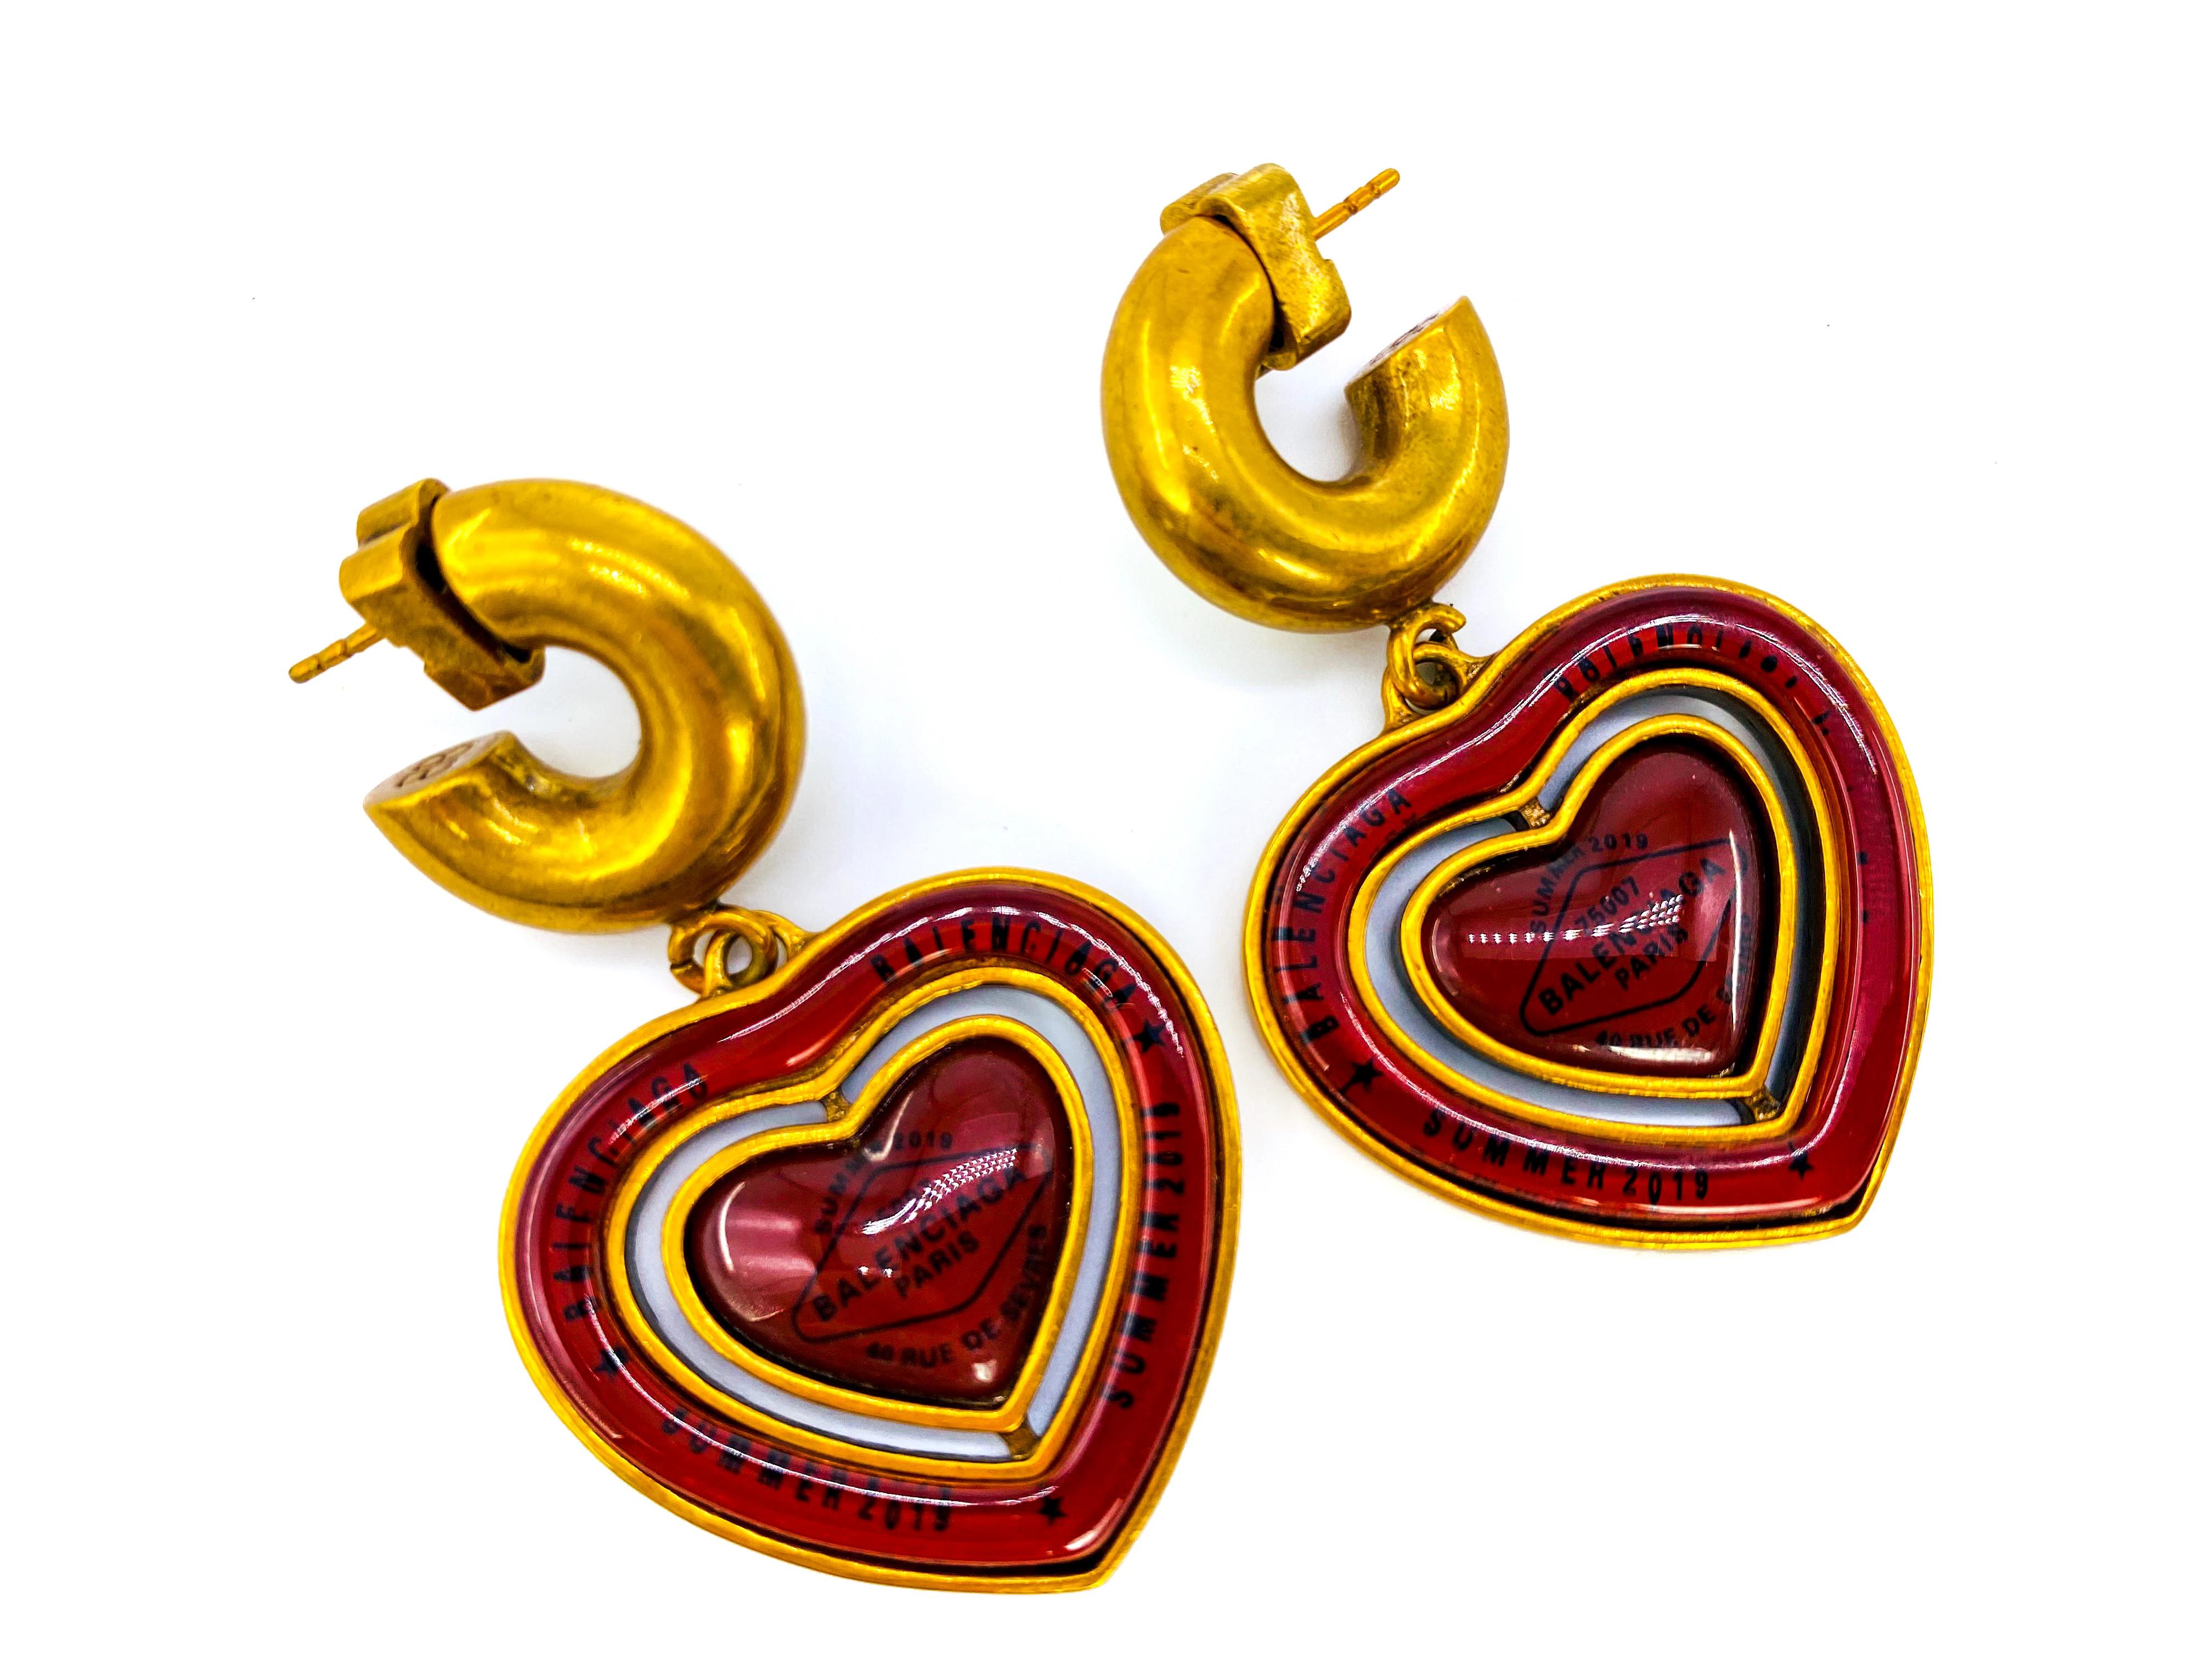 Balenciaga Preloved Statement Heart Earrings Summer 2019. 

Cast from red resin and antique gold metal and inspired by a Casino chip. These were featured in Balenciaga's iconic and awe inspiring SS19 runway show. This pair is further stamped with